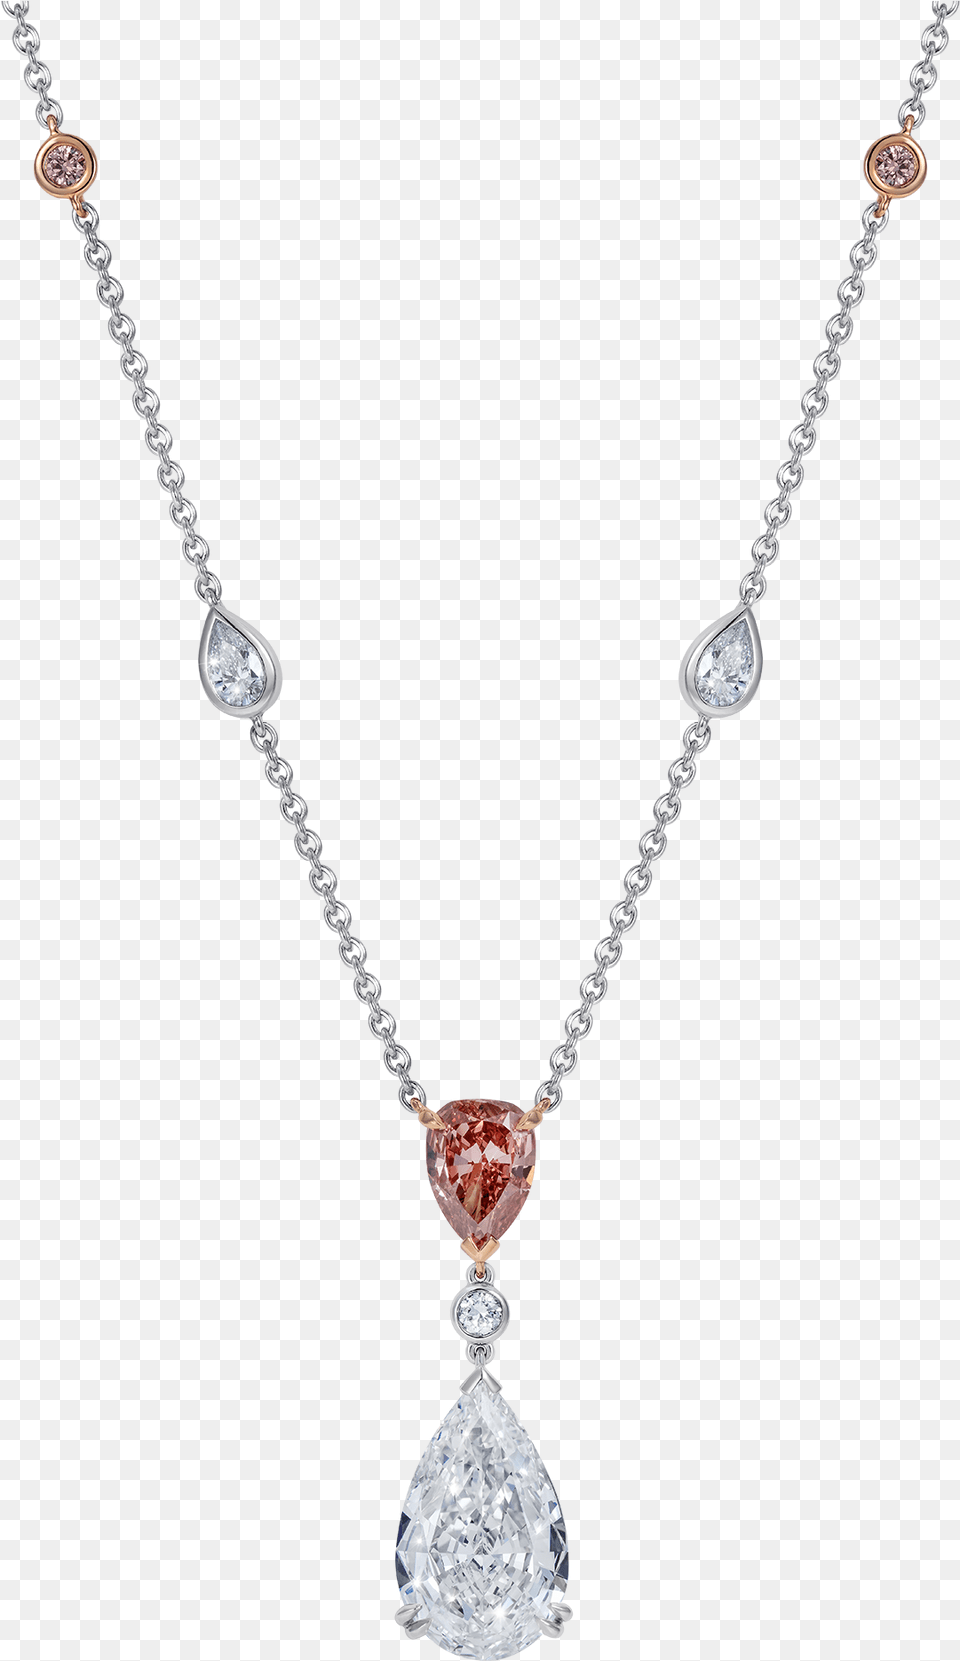 Mayfair Rose Necklace With Argyle Pink And White Diamonds Locket, Accessories, Diamond, Gemstone, Jewelry Png